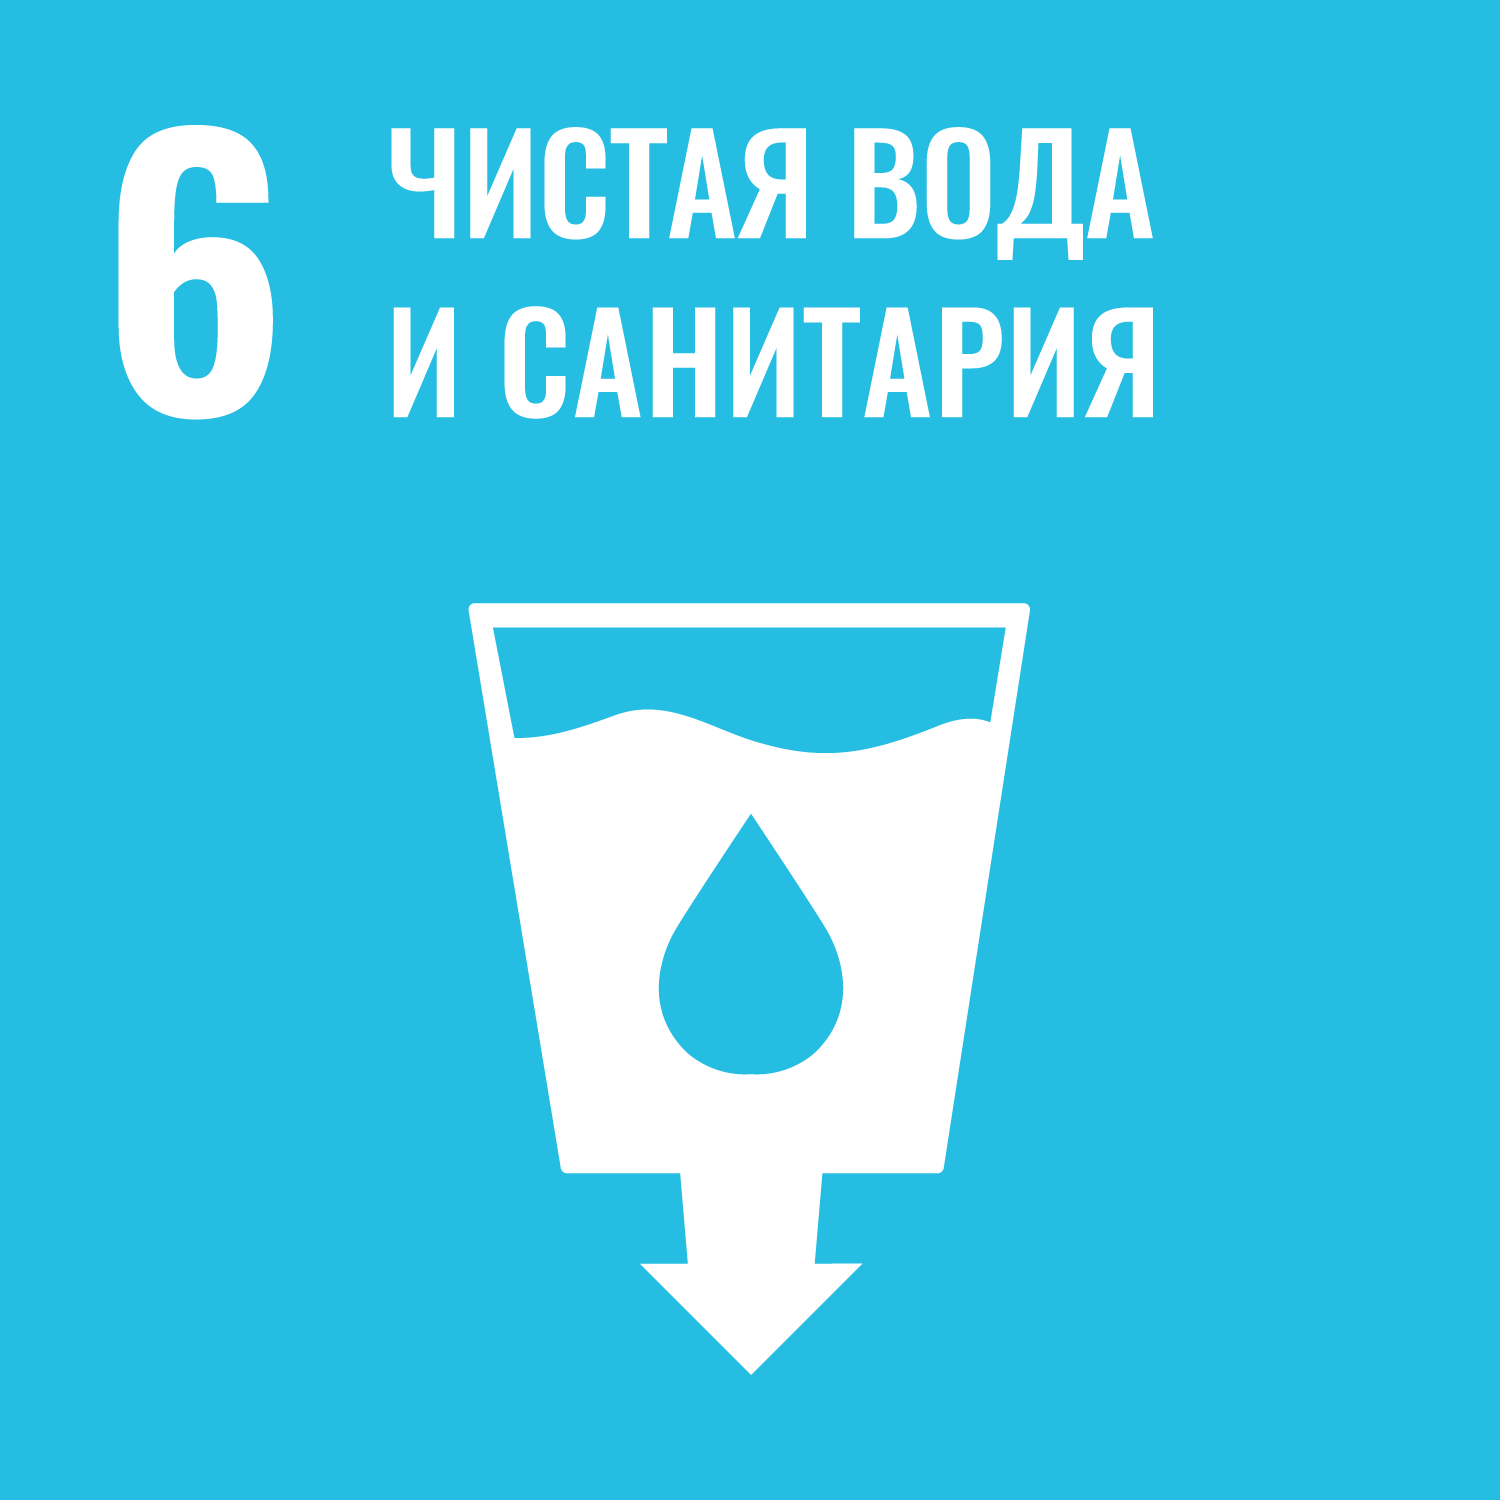 6 - CLEAN WATER AND SANITATION